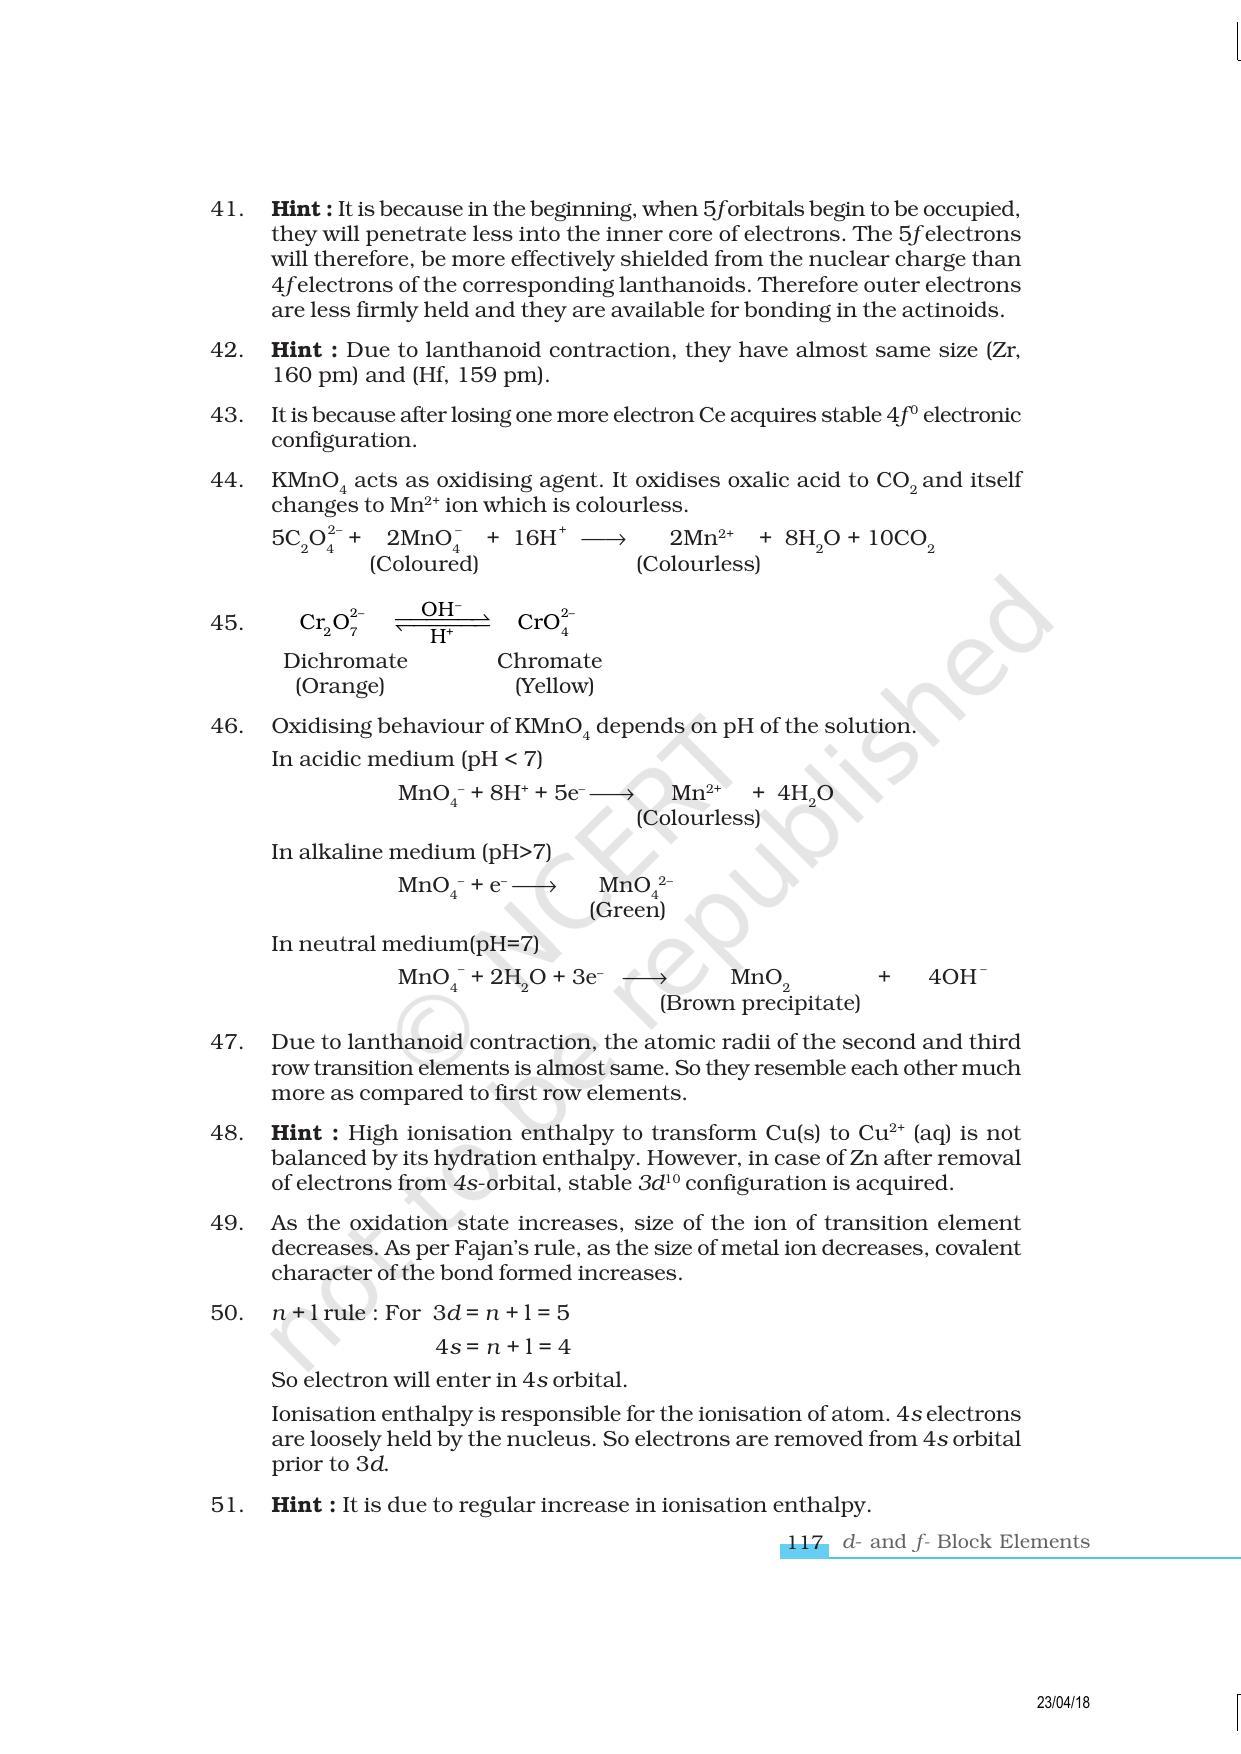 NCERT Exemplar Book for Class 12 Chemistry: Chapter 8 The d- and f- Block Elements - Page 13